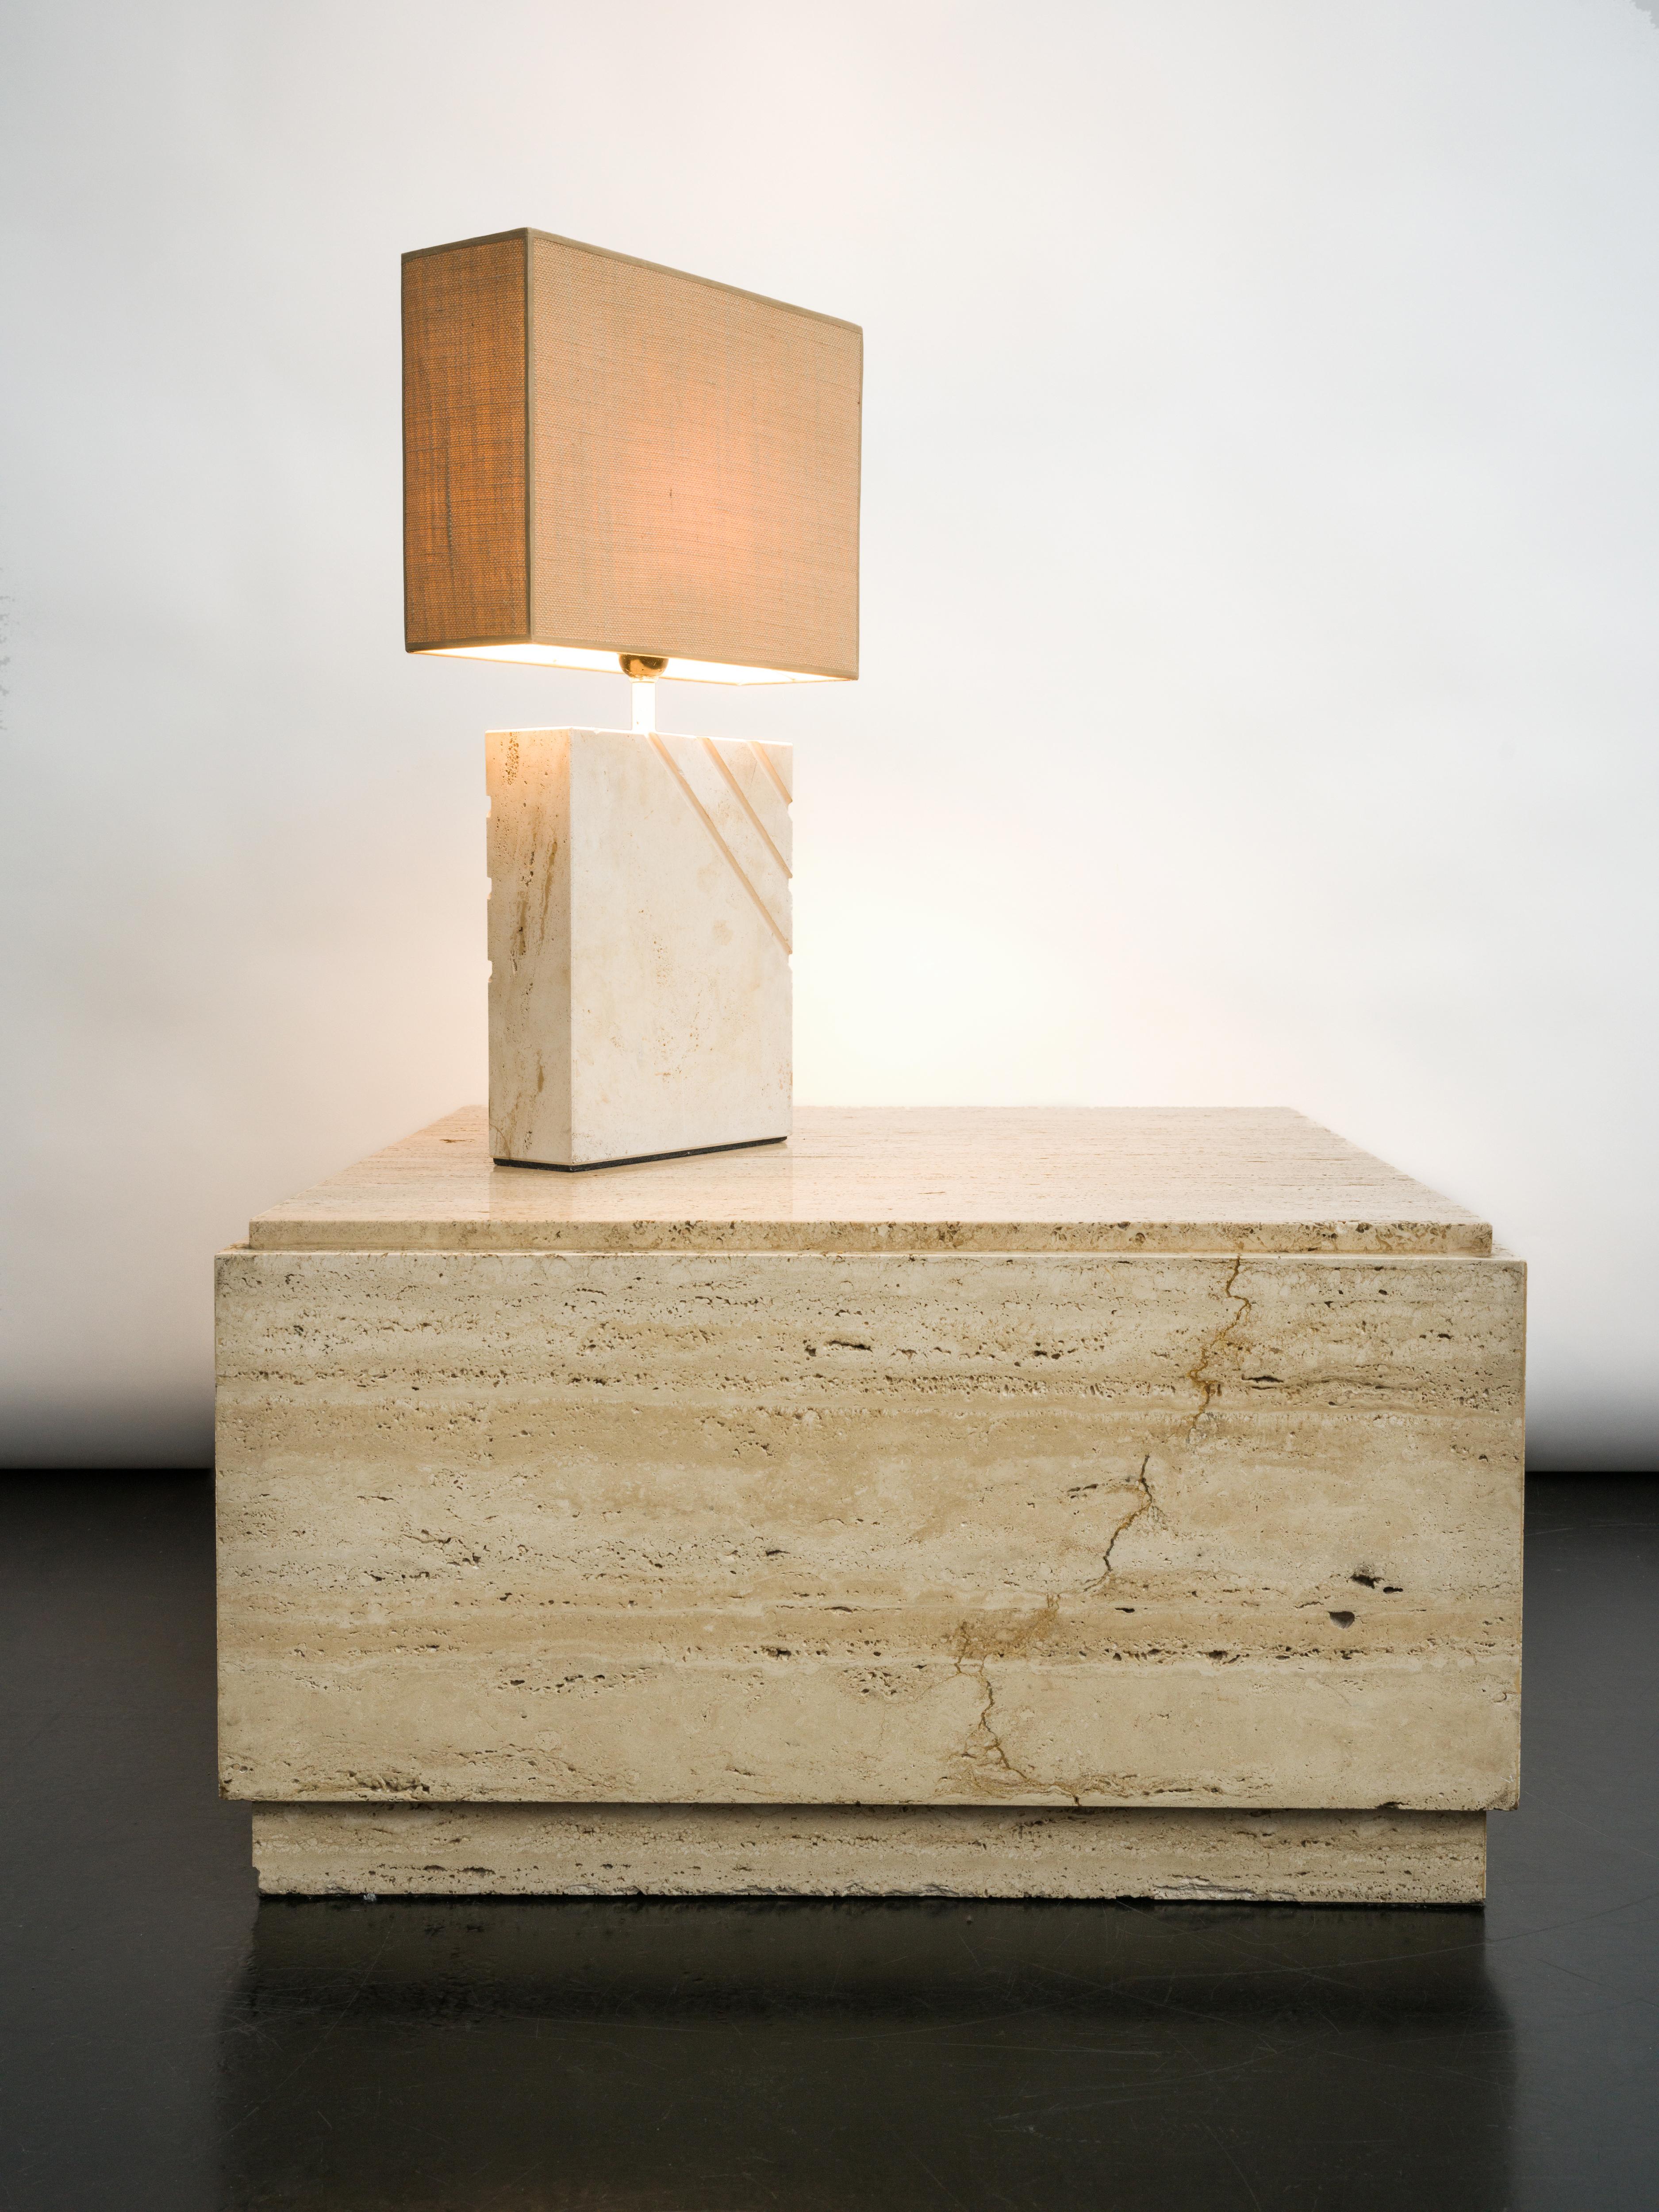 1970s travertine table lamp with rectangular lampshade. The textured shade blends perfectly with the beige stone.
A piece in light colors that will fit easily into your interior and will bring a soft light in the room. In love with its elegance